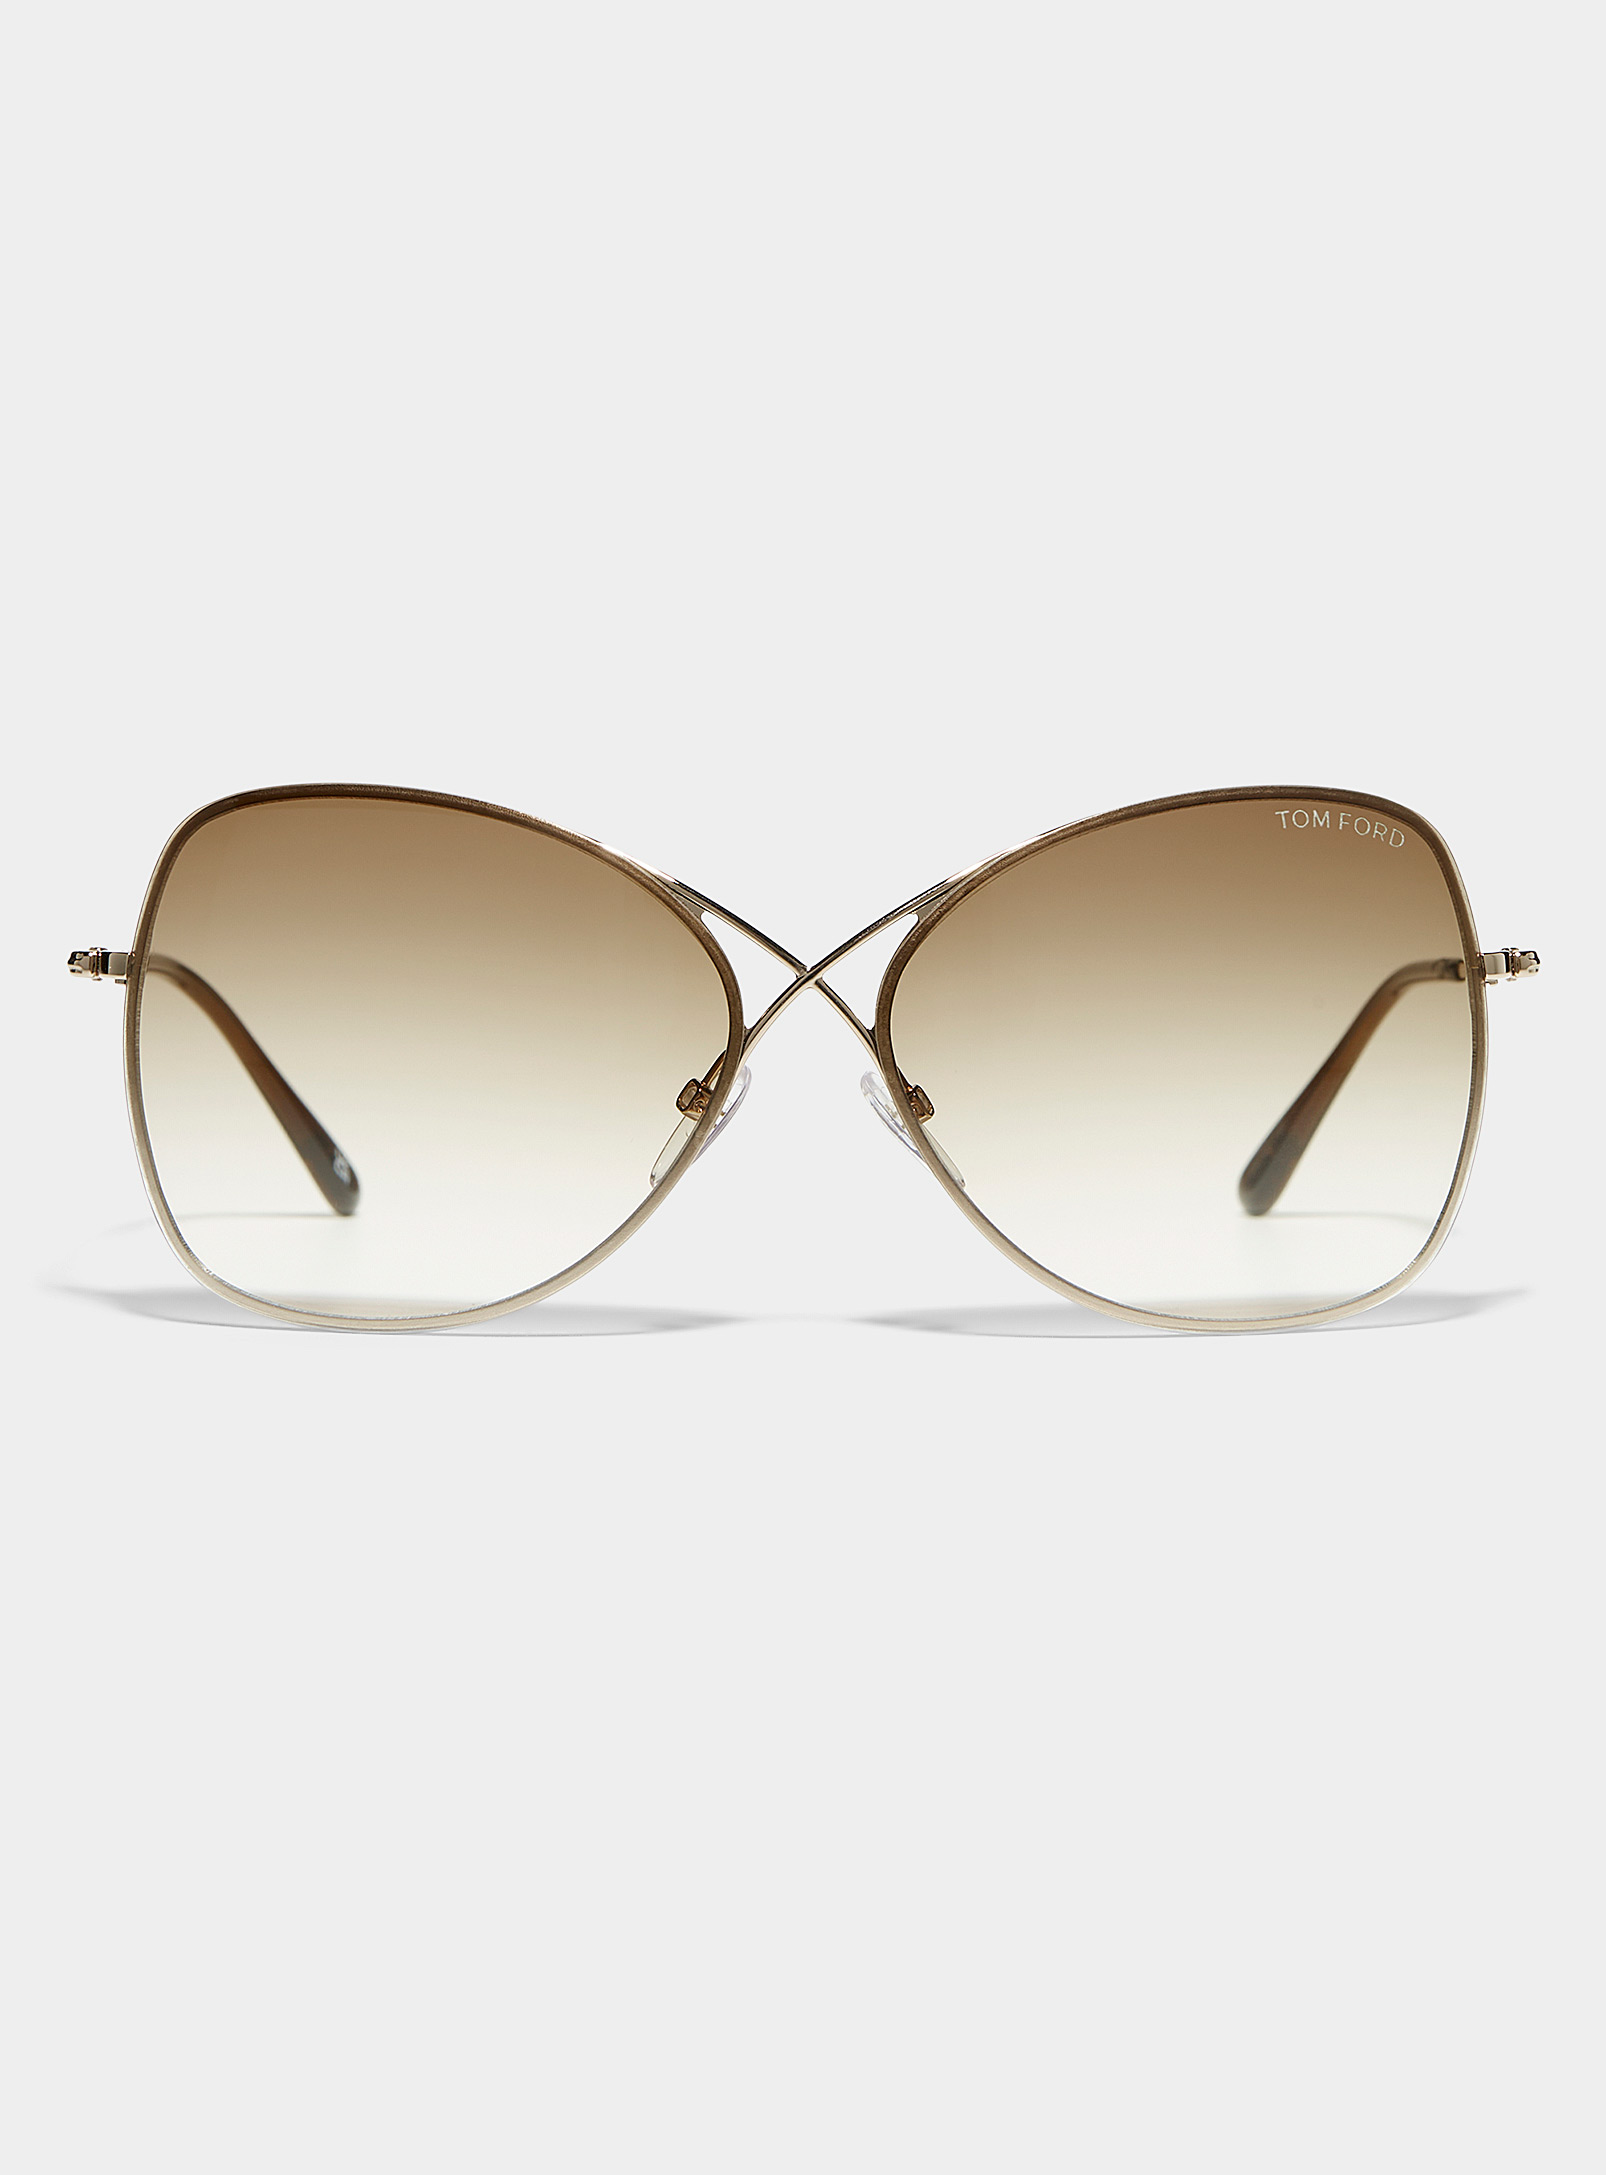 Tom Ford - Women's Colette butterfly sunglasses